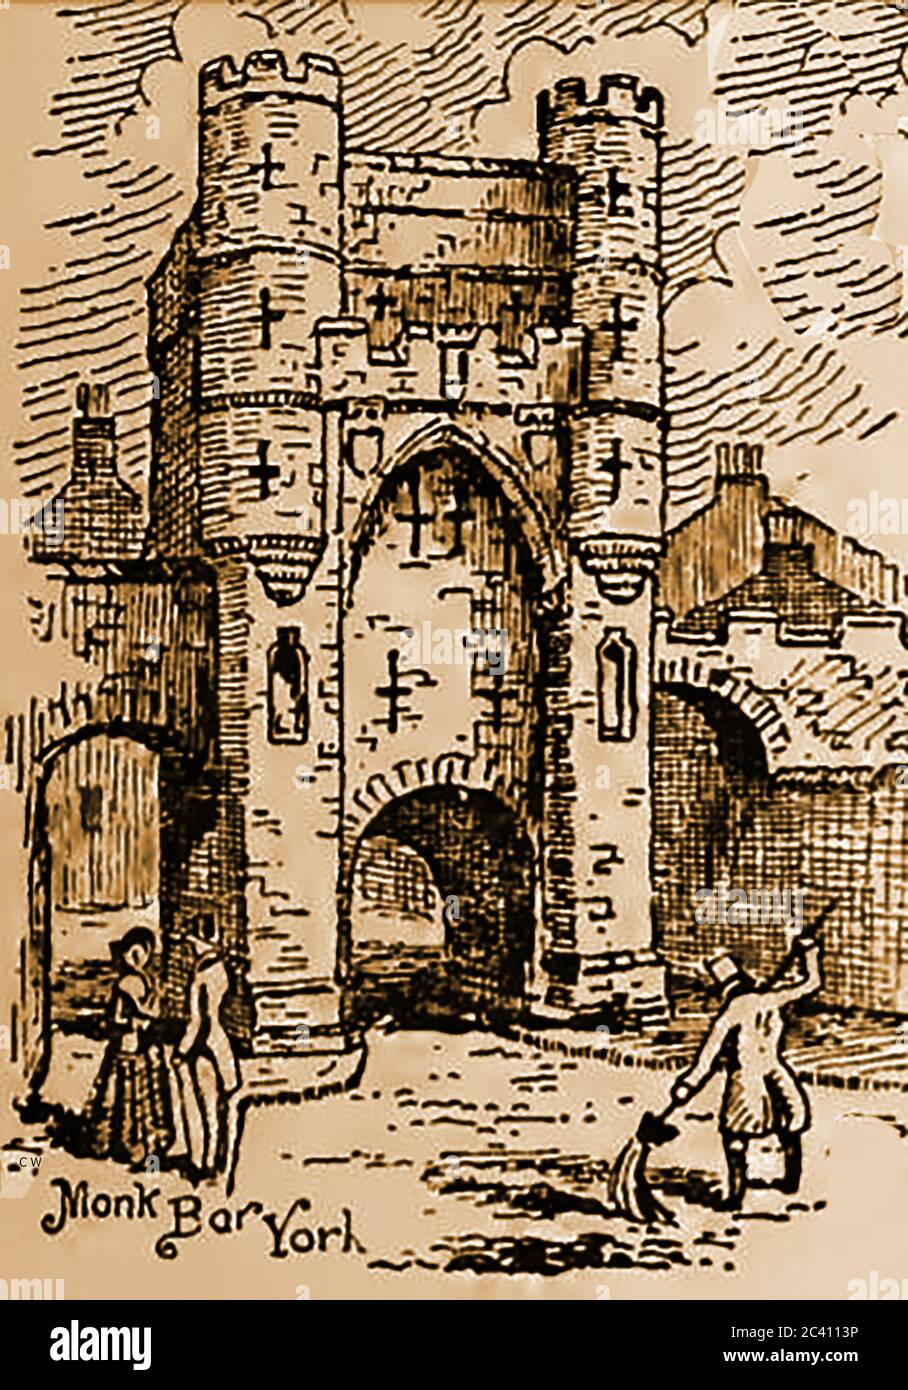 An unusual old engraving showing a Victorian street cleaner  in a top hat at Monks Bar, part of the ancient city walls in  York, England. Monk Bar is one of four ancient major fortified gateways in the city walls. From the 14th century it was built in several stages,   when the threat from an invasion from Scotland was very real.   Its top storey was added in 1484 during the reign of Richard III. Stock Photo